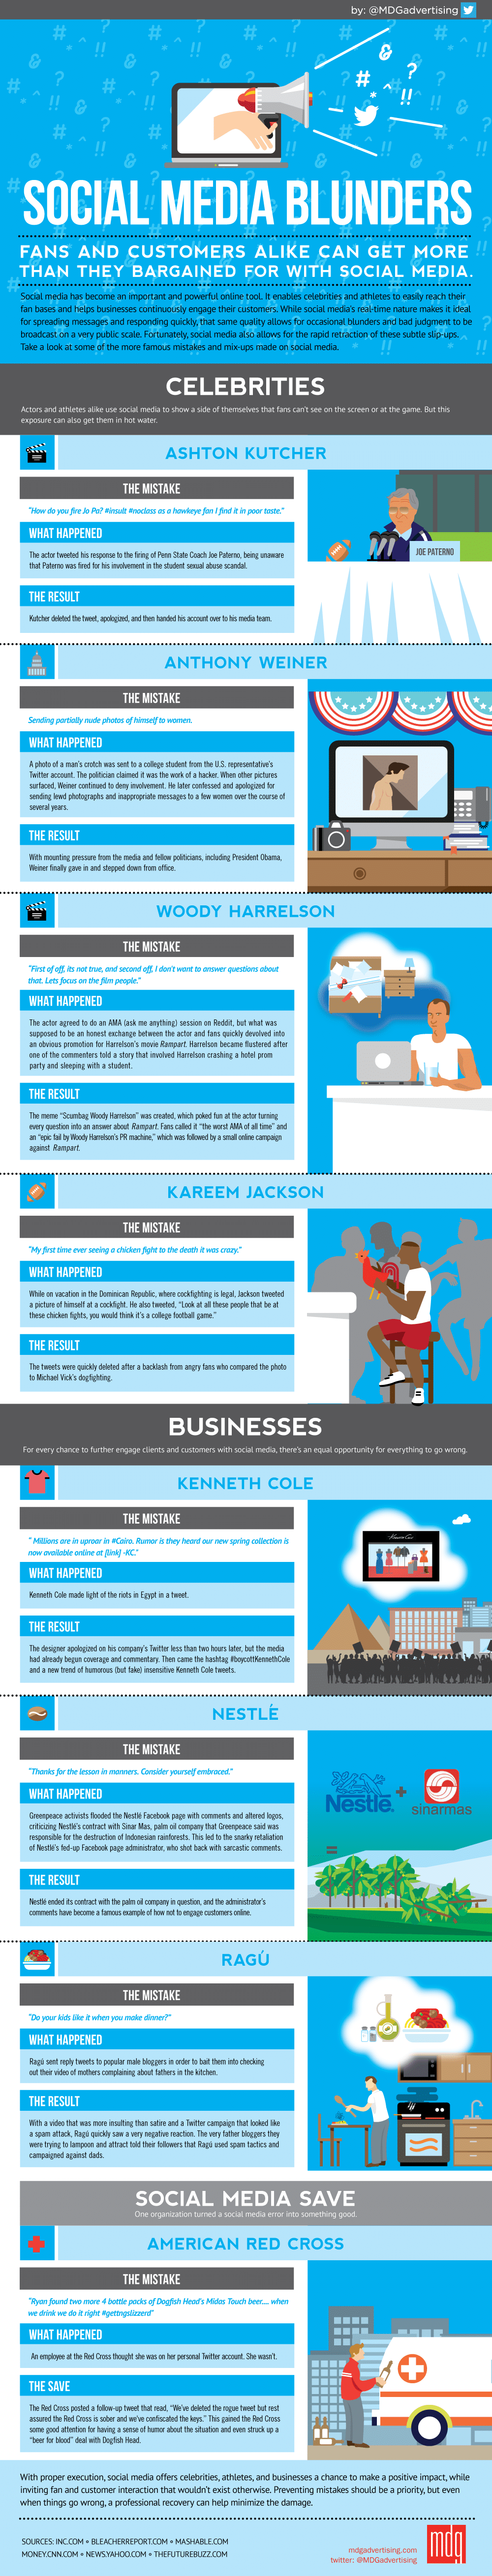 blunders-in-social-media-infographic